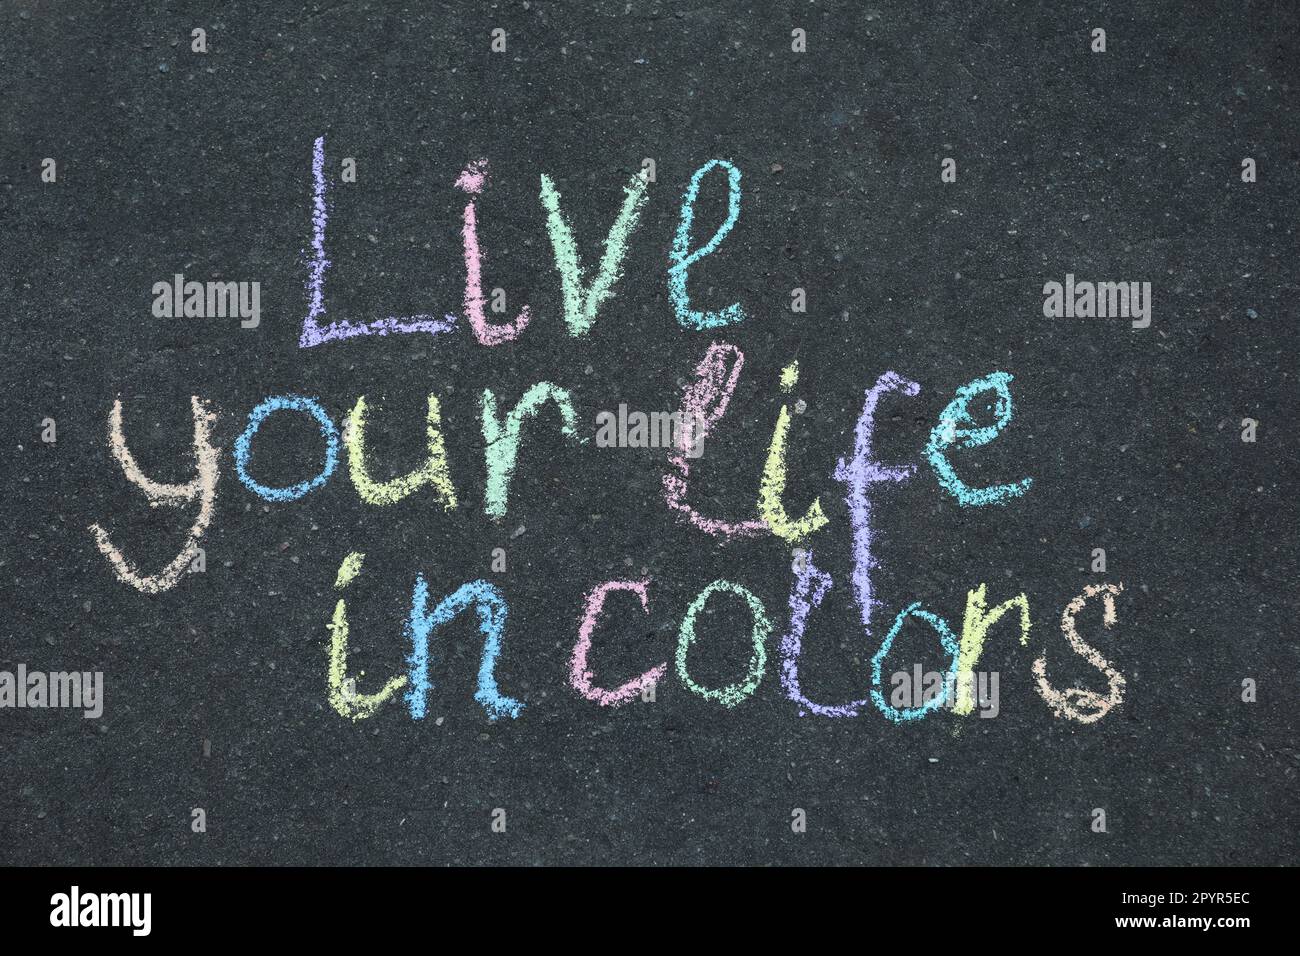 Phrase Live Your Life In Colors written on asphalt, top view Stock Photo